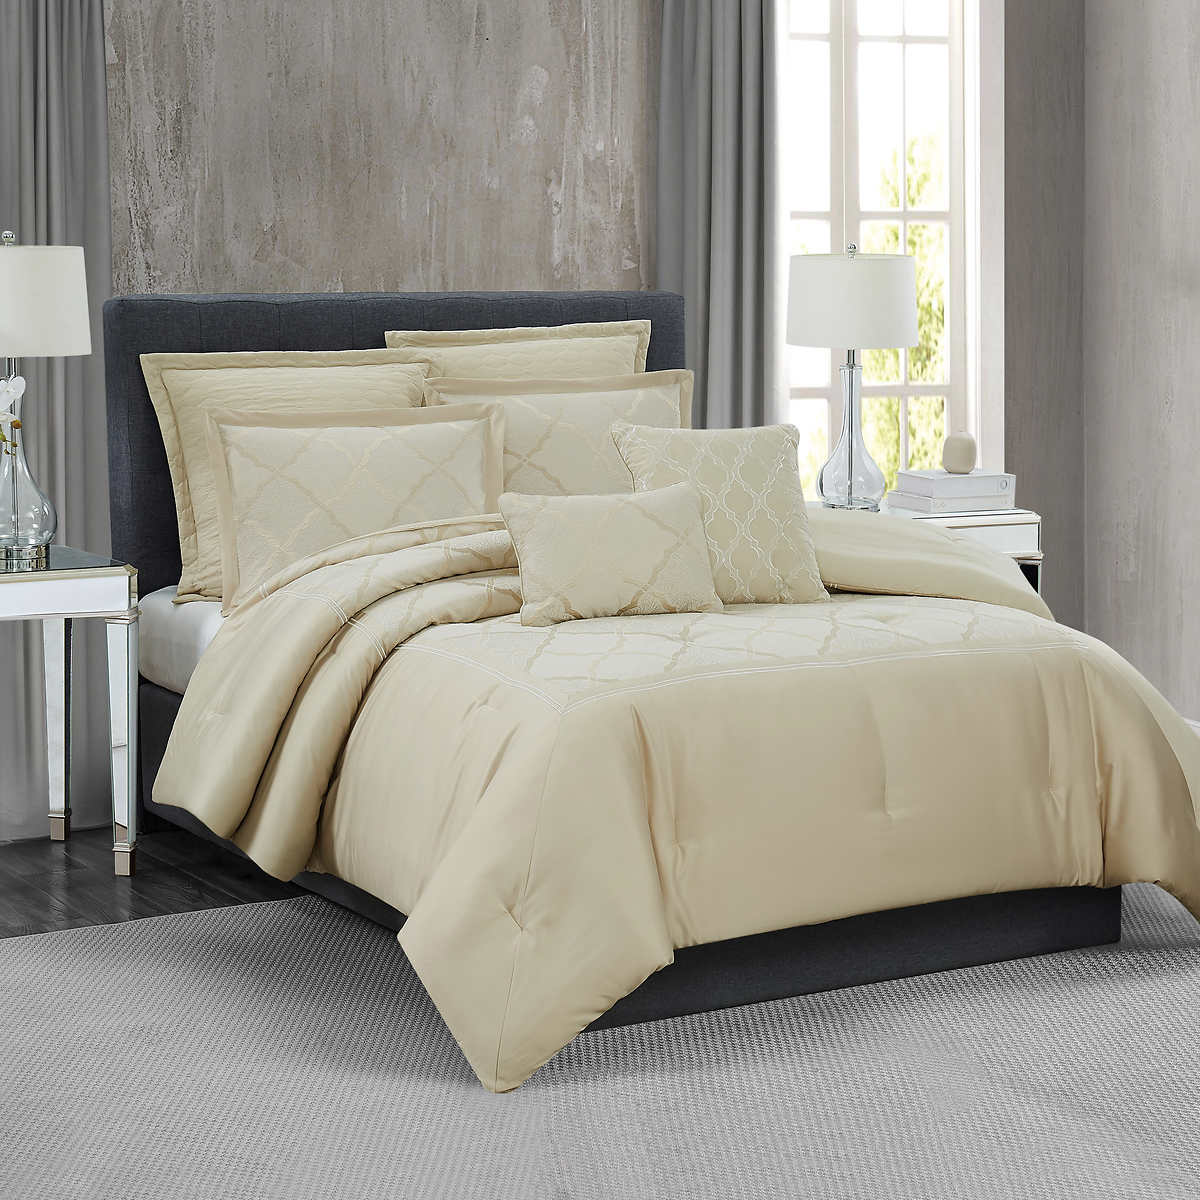 Fifth Avenue Lux Coventry 7-piece Comforter Set, Champagne, Queen